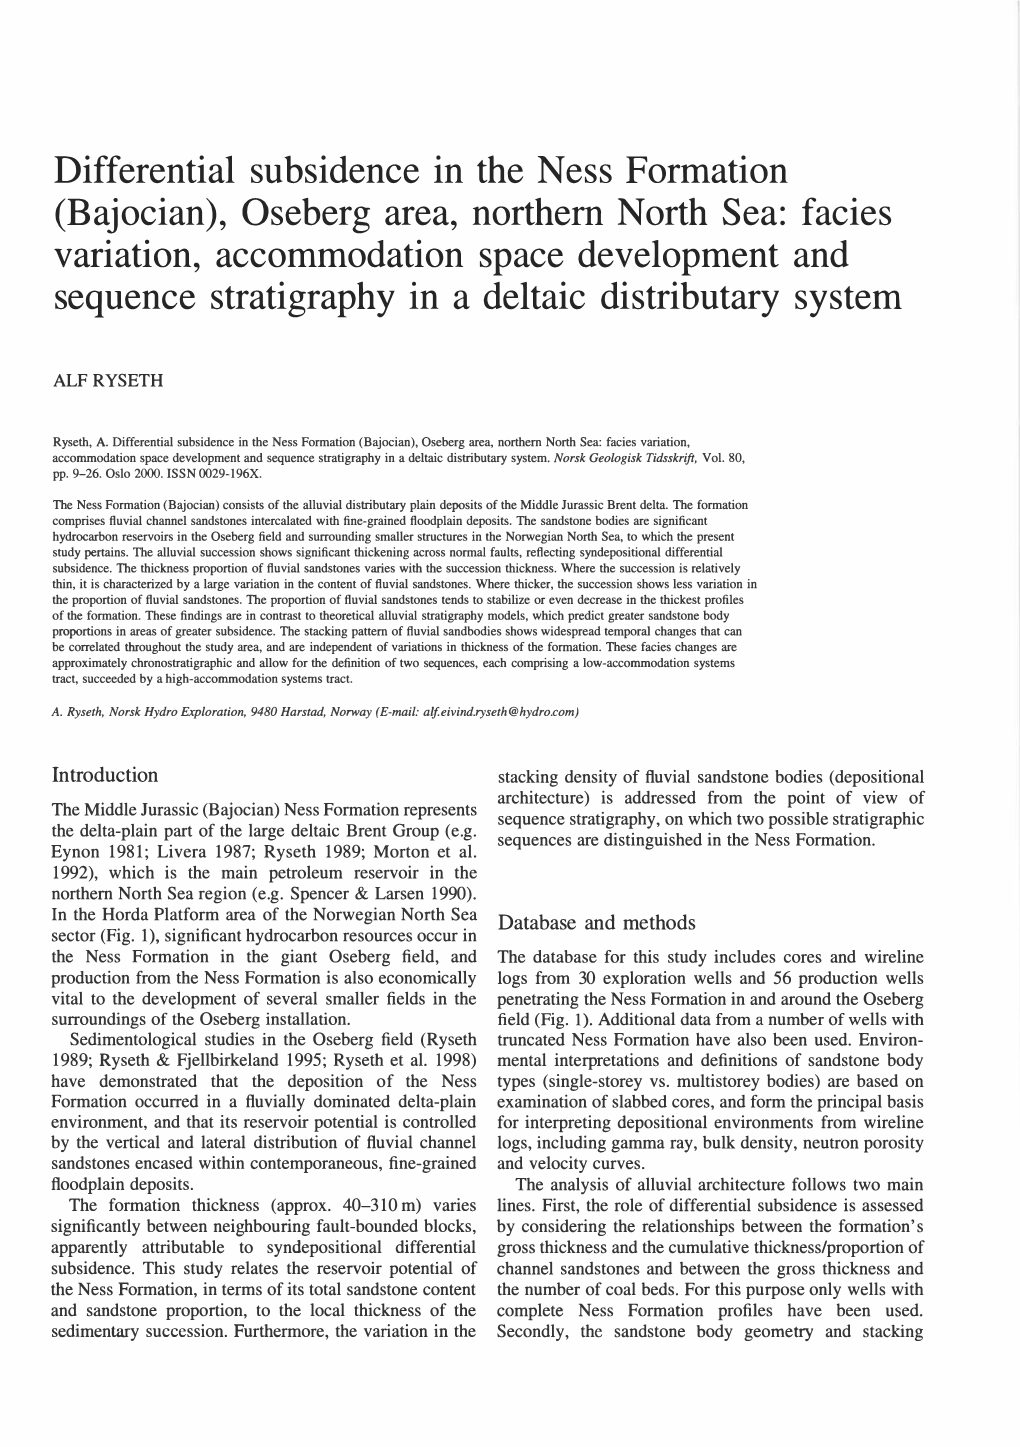 Oseberg Area, Northem North Sea: Facies Variation, Accommodation Space Development and Sequence Stratigraphy in a Deltaic Distributary System